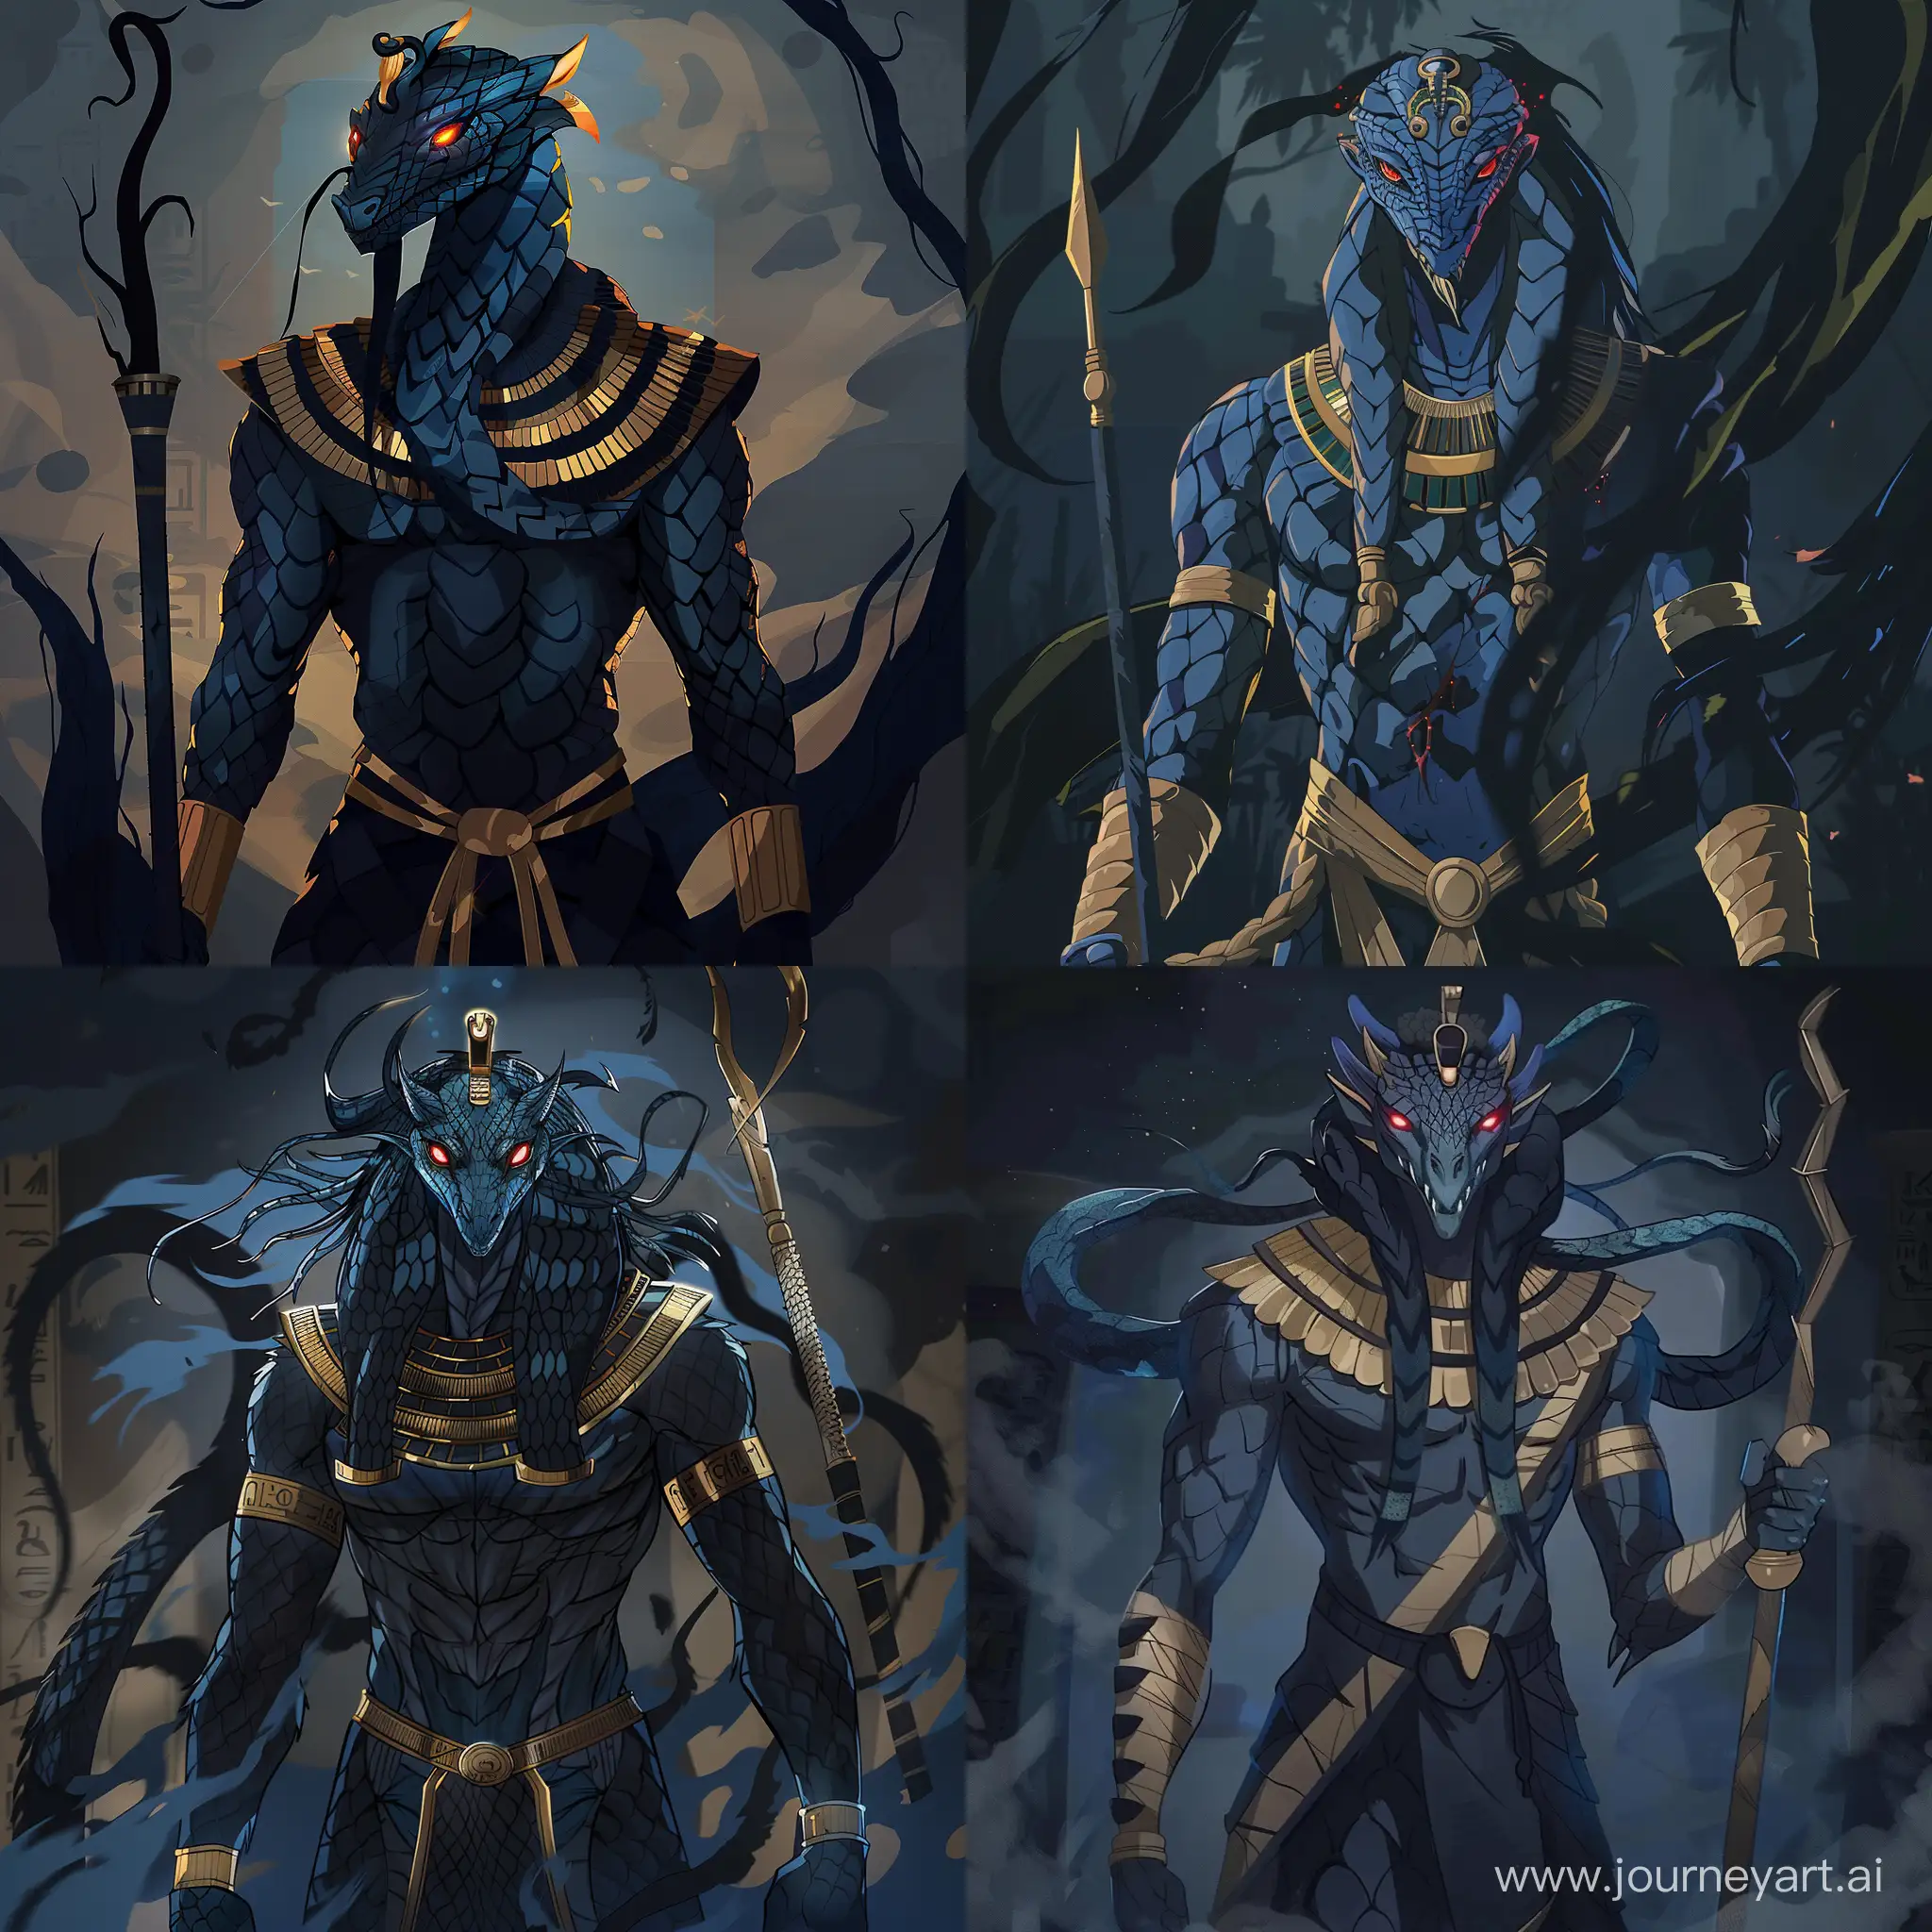 2D anime style Apophis, the Eternal Darkness, a colossal serpent deity from Egyptian mythology, embodying chaos and the night sky. His scales shimmer in dark hues of blue and black, with fiery red or golden eyes that pierce through the darkness. Shadowy tendrils emanate from his back, forming ominous shapes. In his anthropomorphic form, he possesses a striking, angular face with narrow, slanted eyes and serpent-like pupils, crowned with a traditional Egyptian headdress. His attire is minimal yet regal, featuring golden armlets, a broad collar, and a loincloth made of living darkness. He wields an ancient Egyptian khopesh or a staff, channeling dark powers